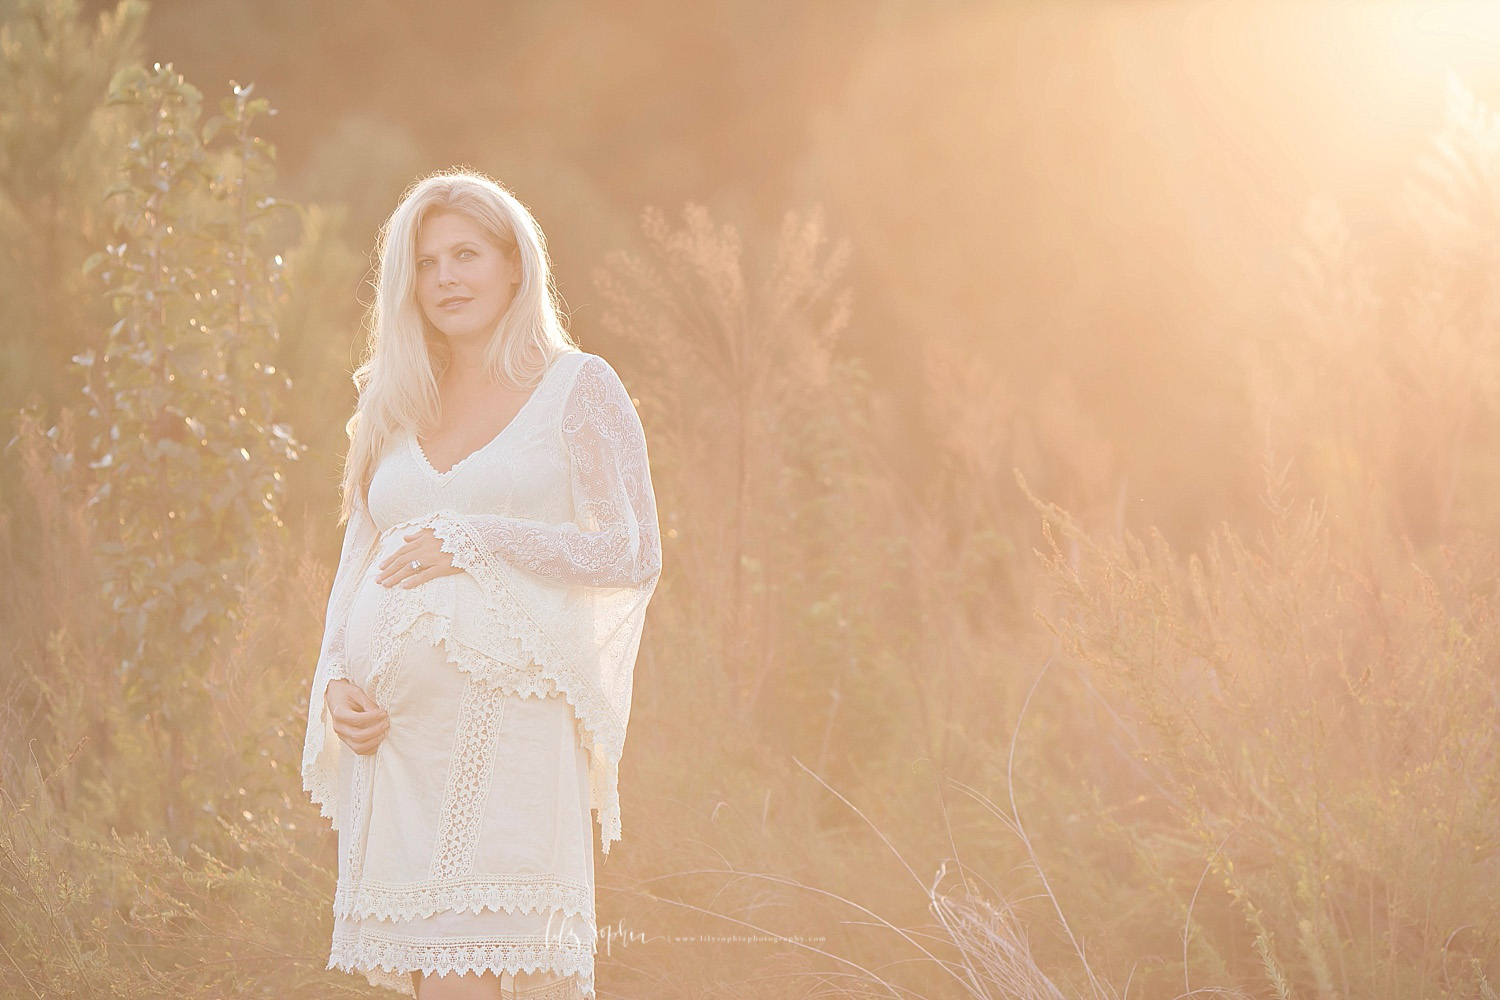  Image of a pregnant, woman, wearing a lace dress, with bell sleeves, standing in a field at sunset.&nbsp; 